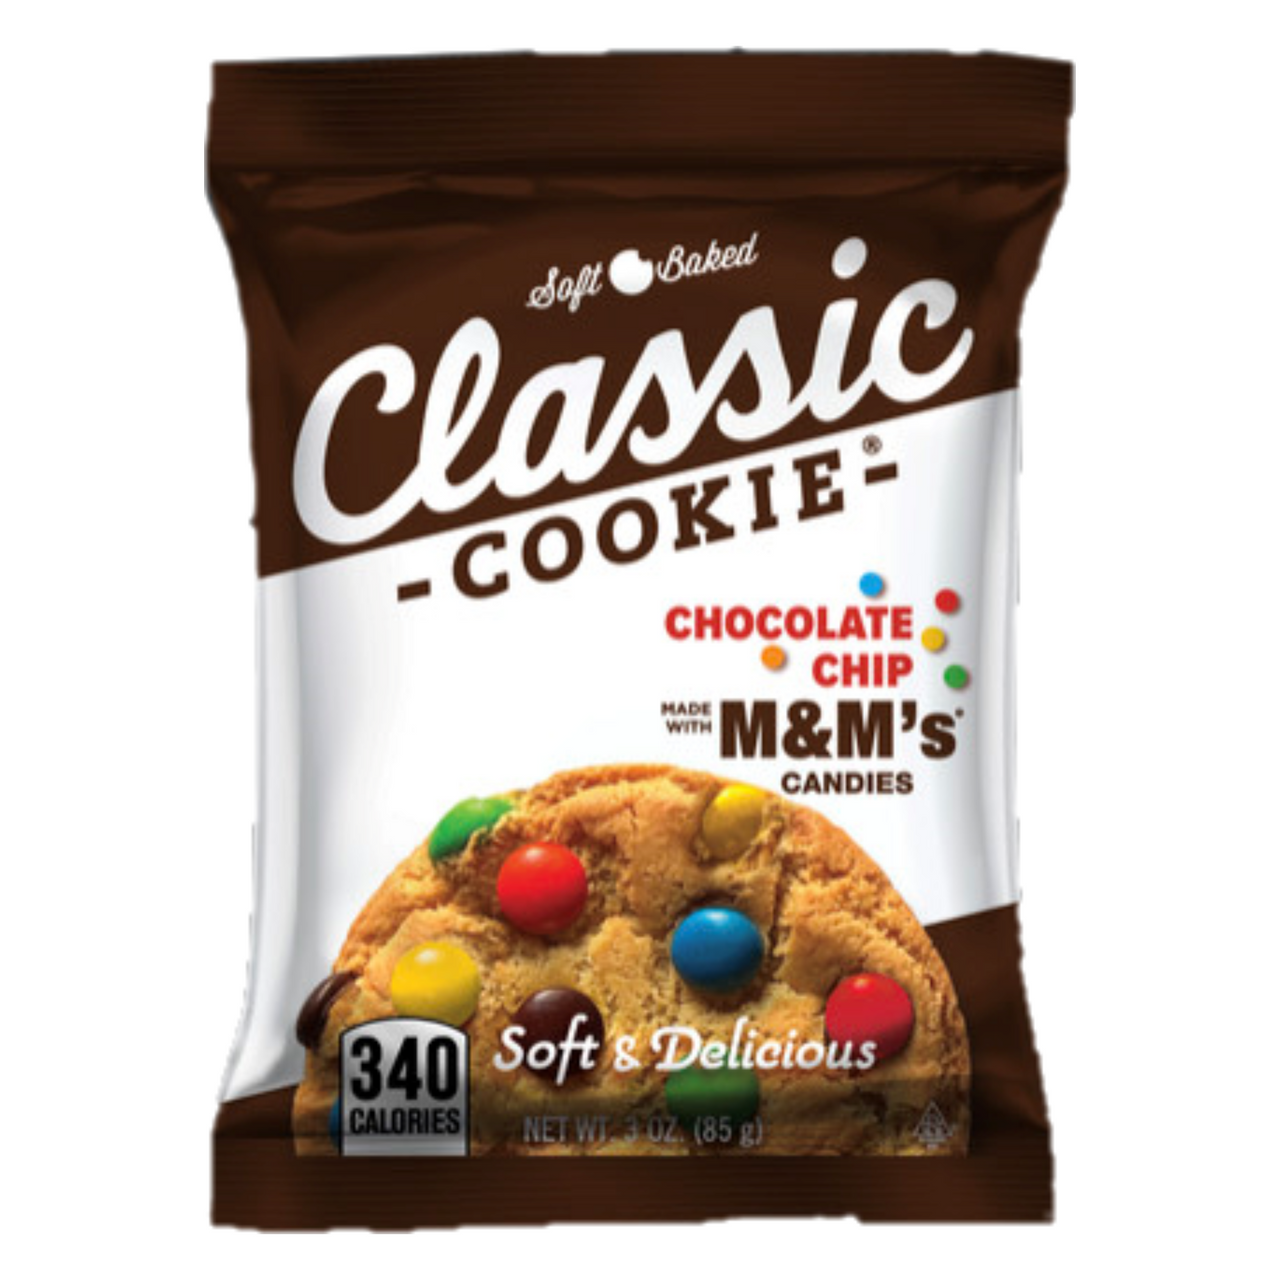 Classic Cookie Soft Baked Chocolate Chip Cookies made with M&M's® Candies,  2 Boxes, 16 Individually Wrapped Cookies